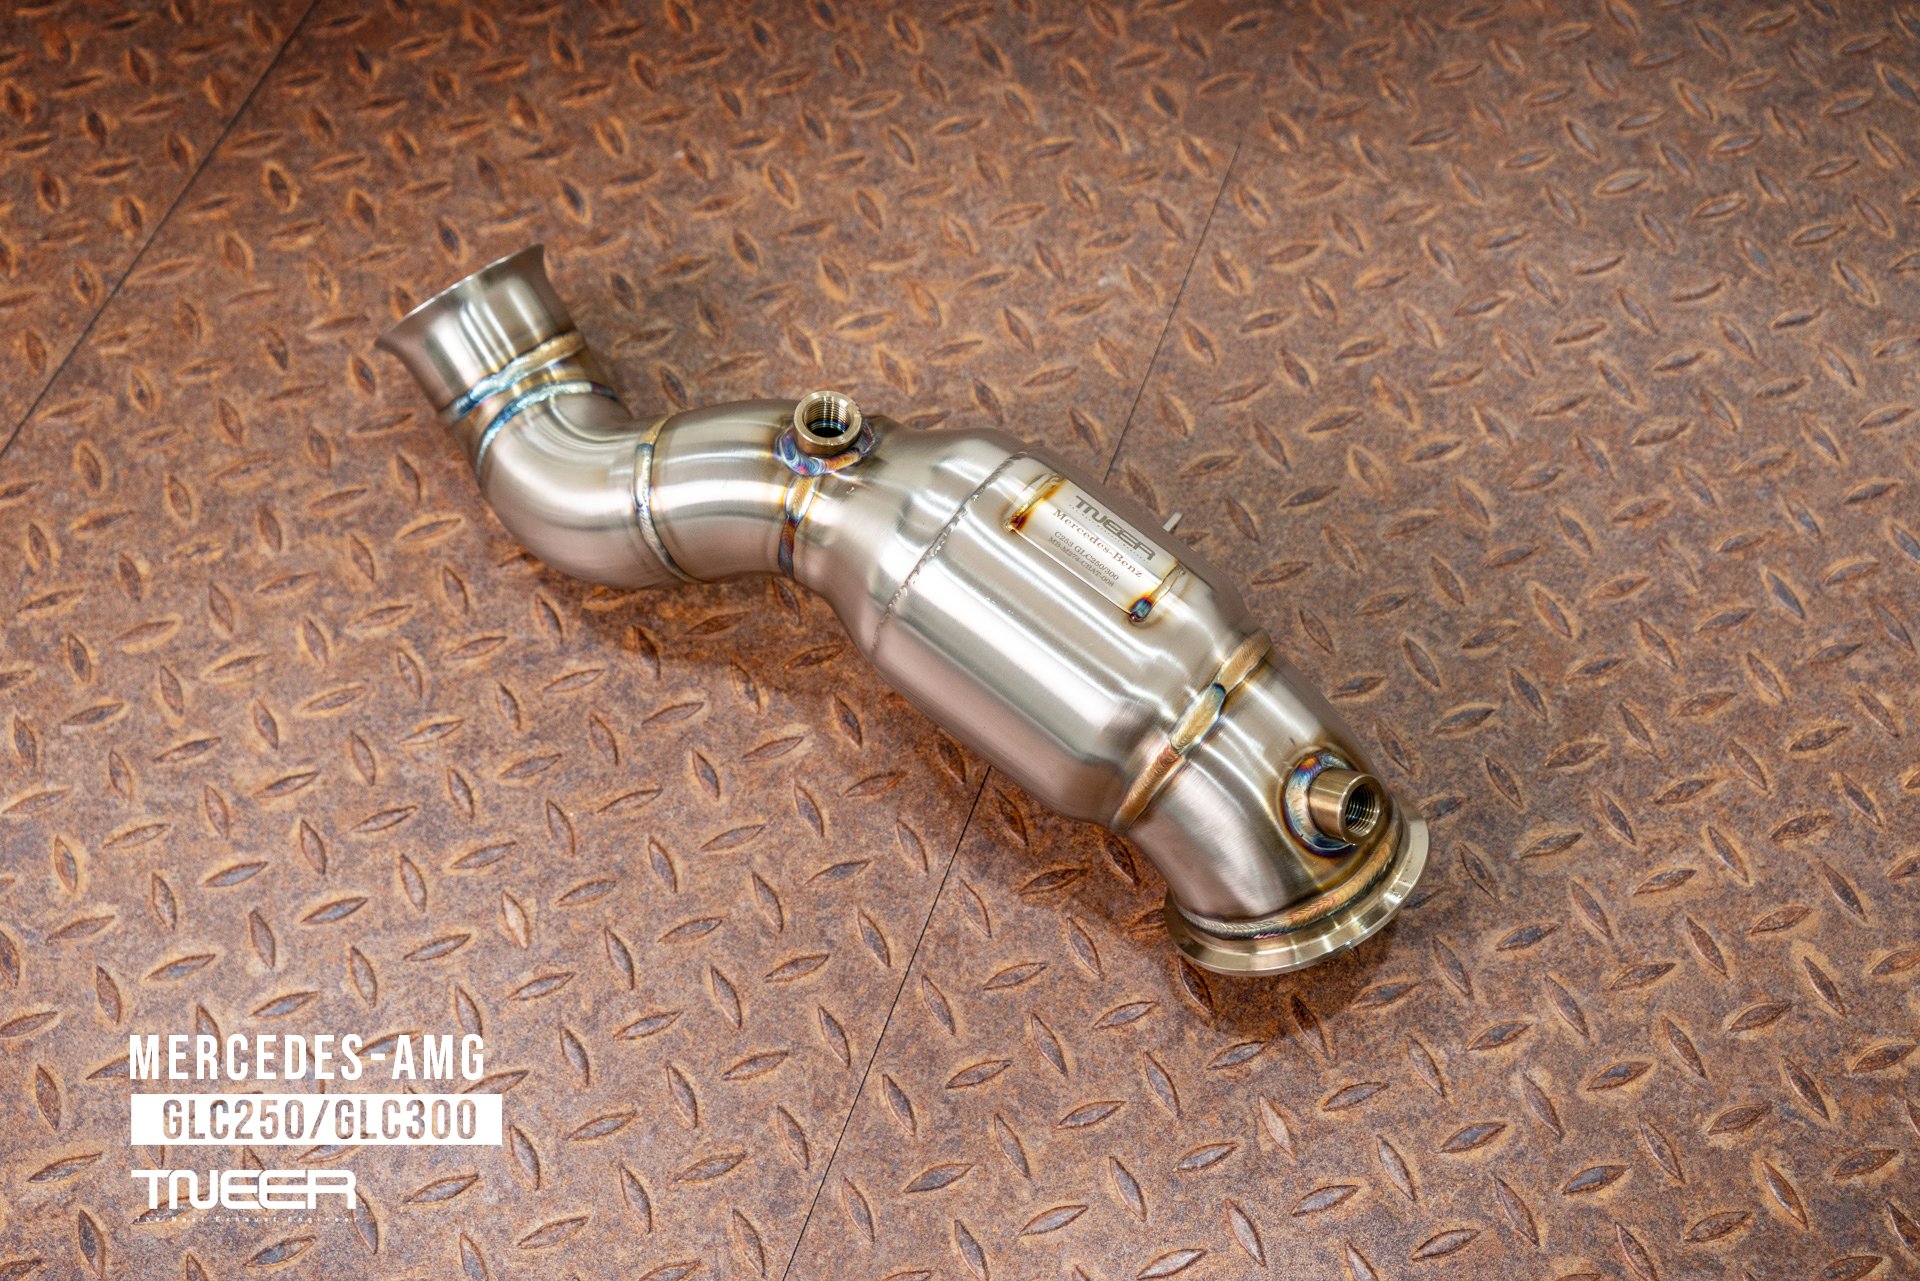 BMW F13 (M6 Cabriolet) TNEER Valvetronic Exhaust System with TACS